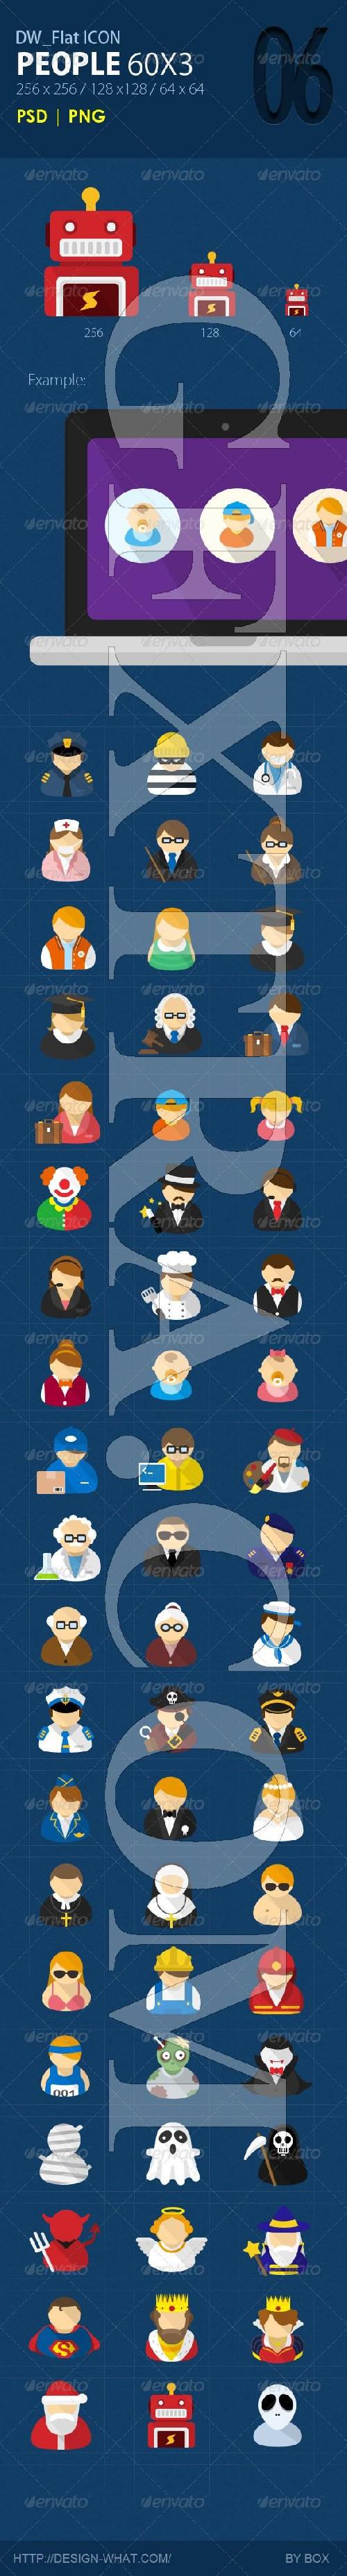 60 Flat ICONs (People)